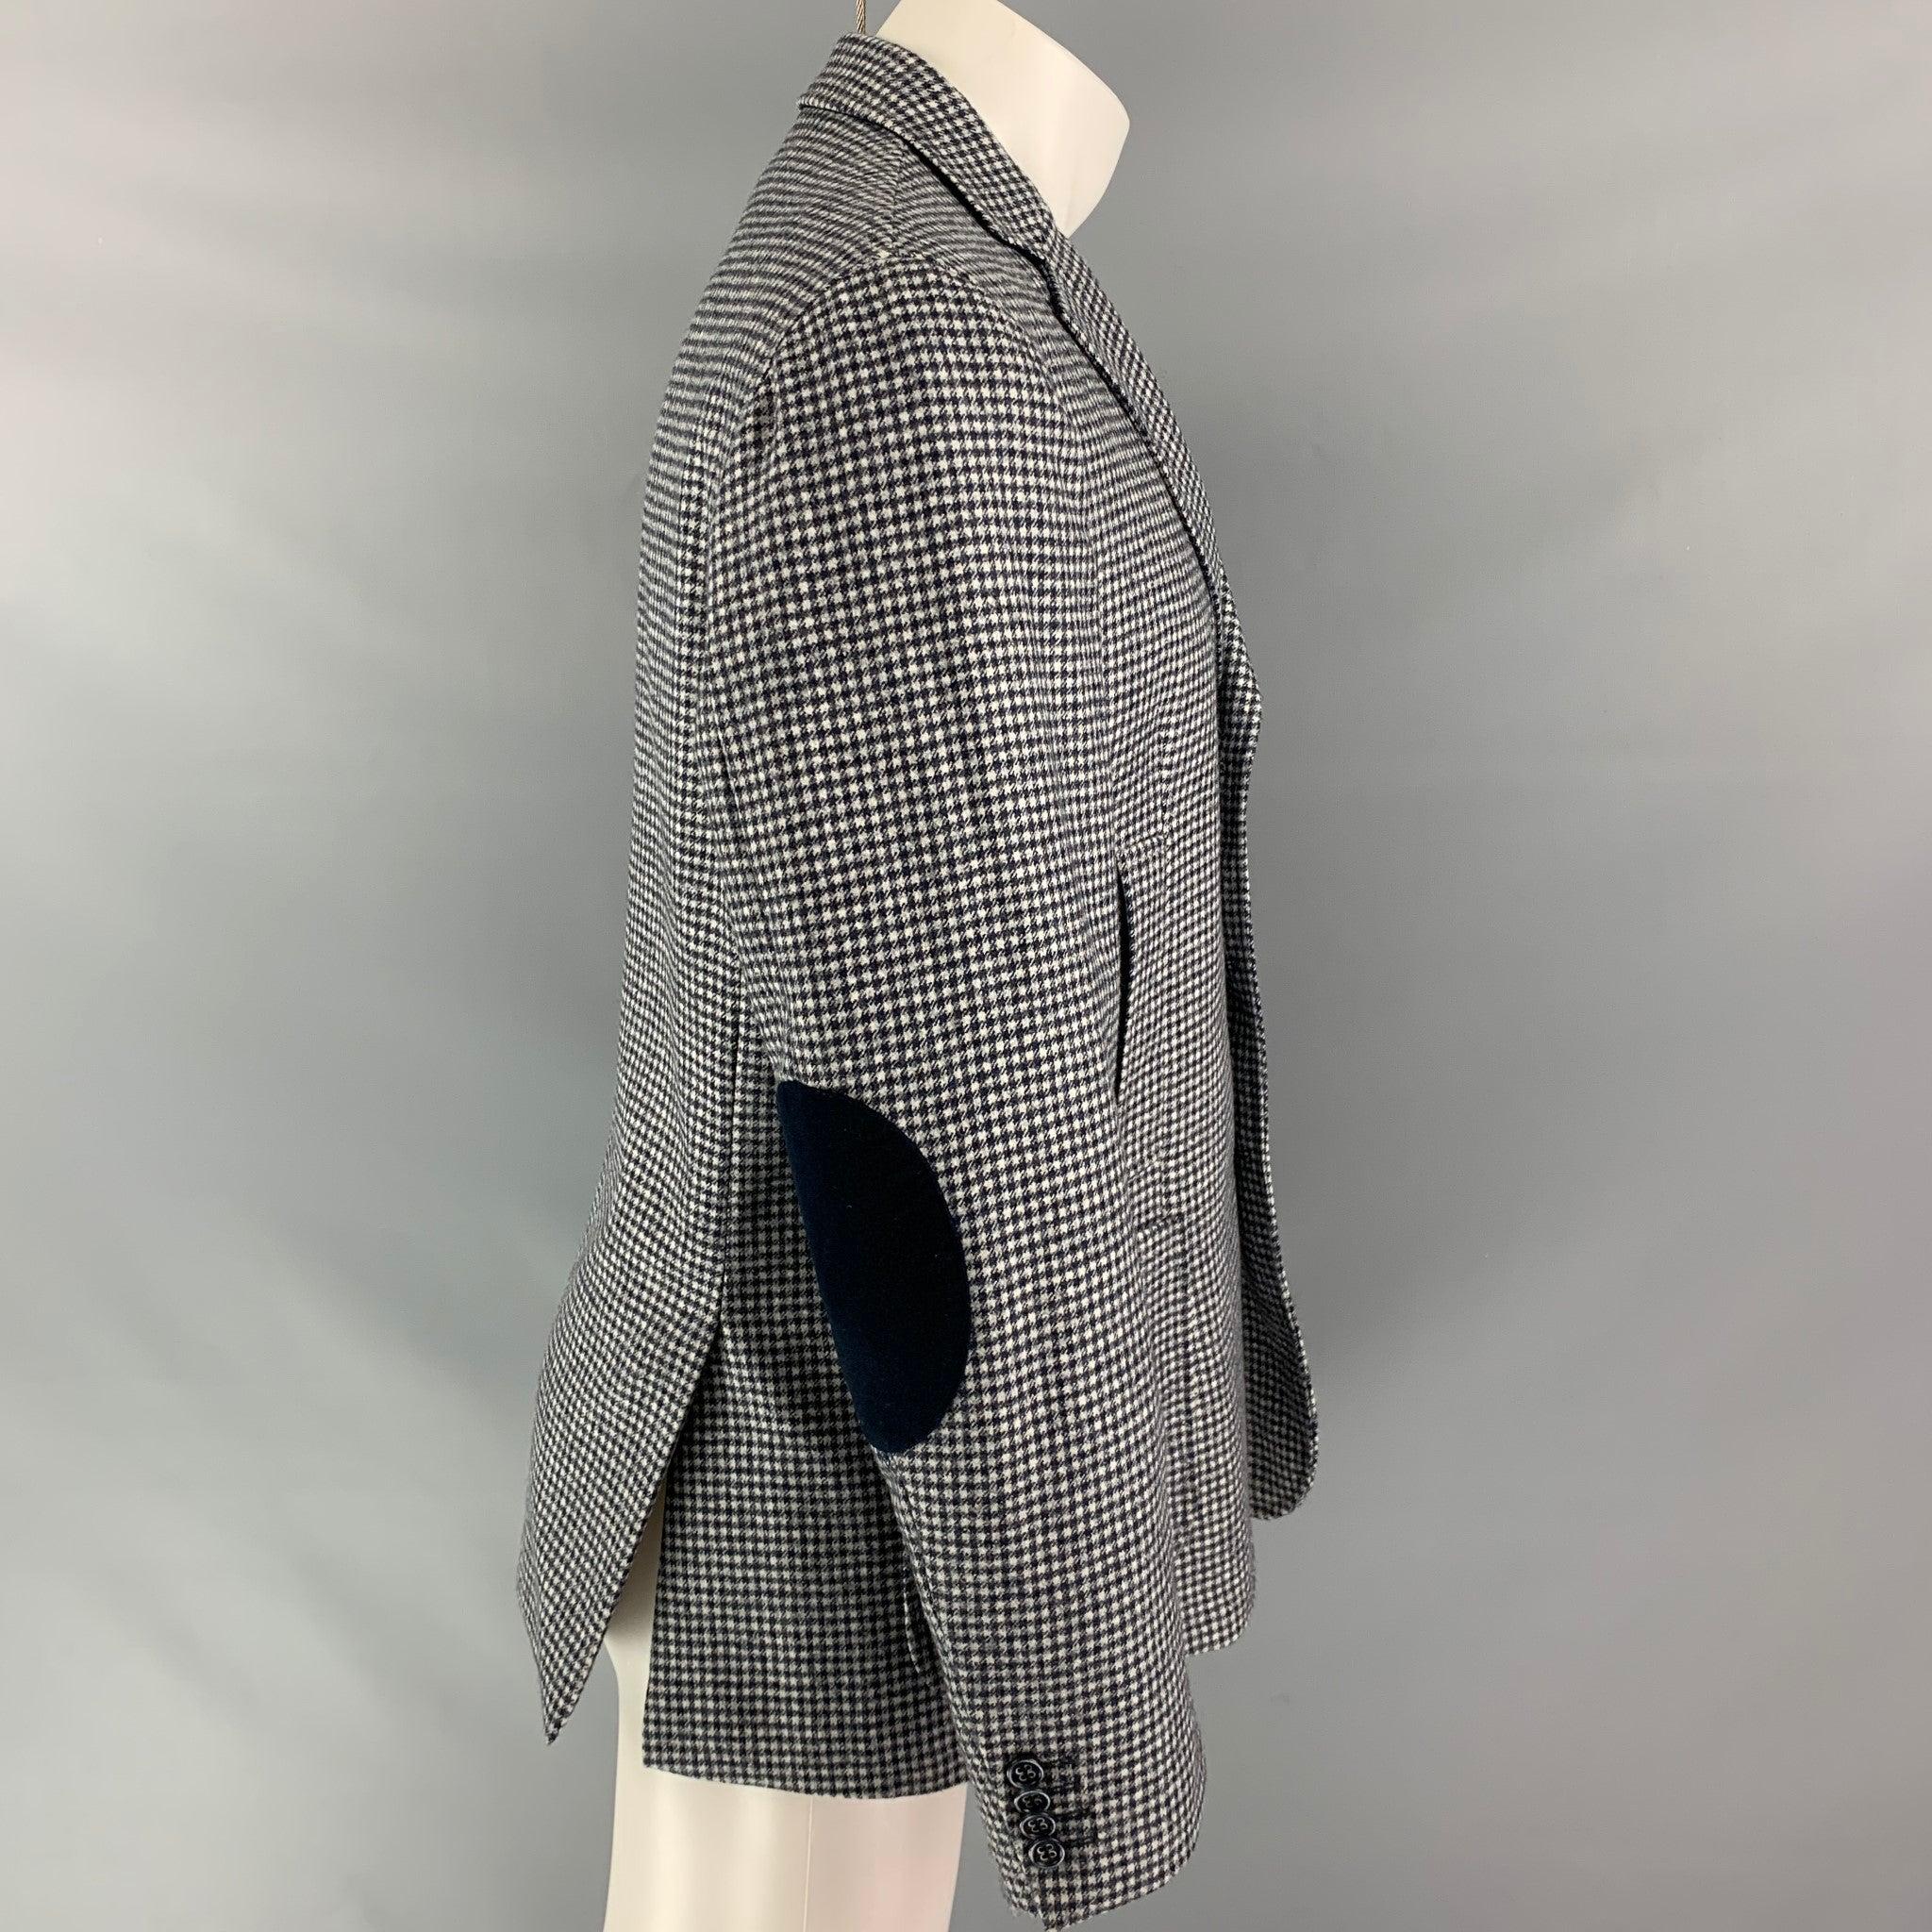 NEIMAN MARCUS sport coat comes in a black and white houndstooth wool, fully lined featuring three button closure, two patch pockets and notch lapel.
 Made in Italy. Excellent Pre-Owned Condition.  

Marked:   50 

Measurements: 
 
Shoulder:
17.5